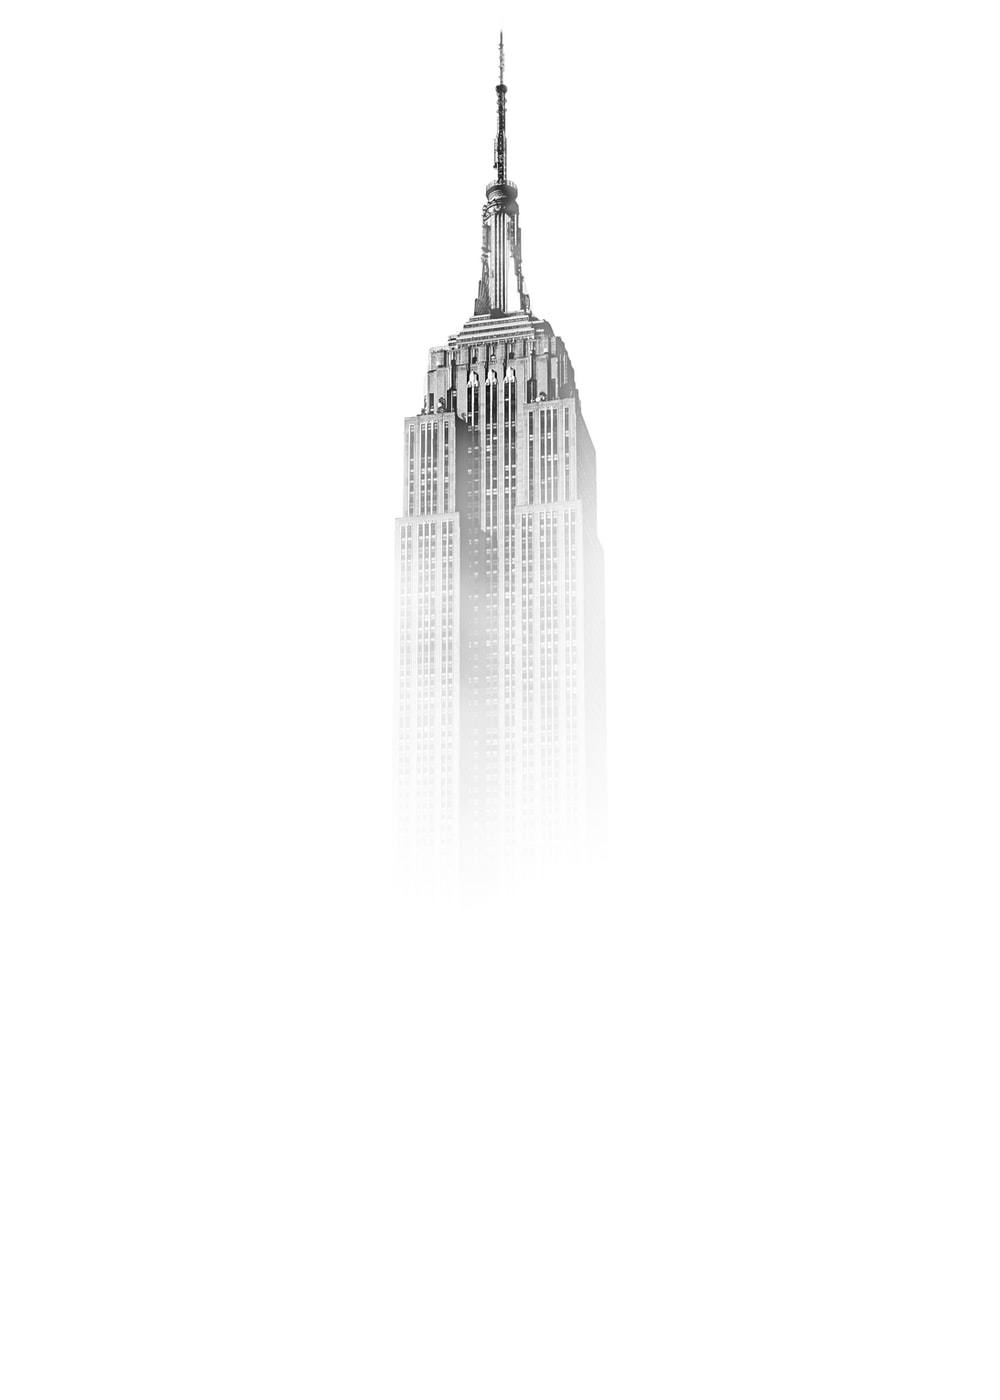 New York City Empire State Building Skyscrapers Wallpapers